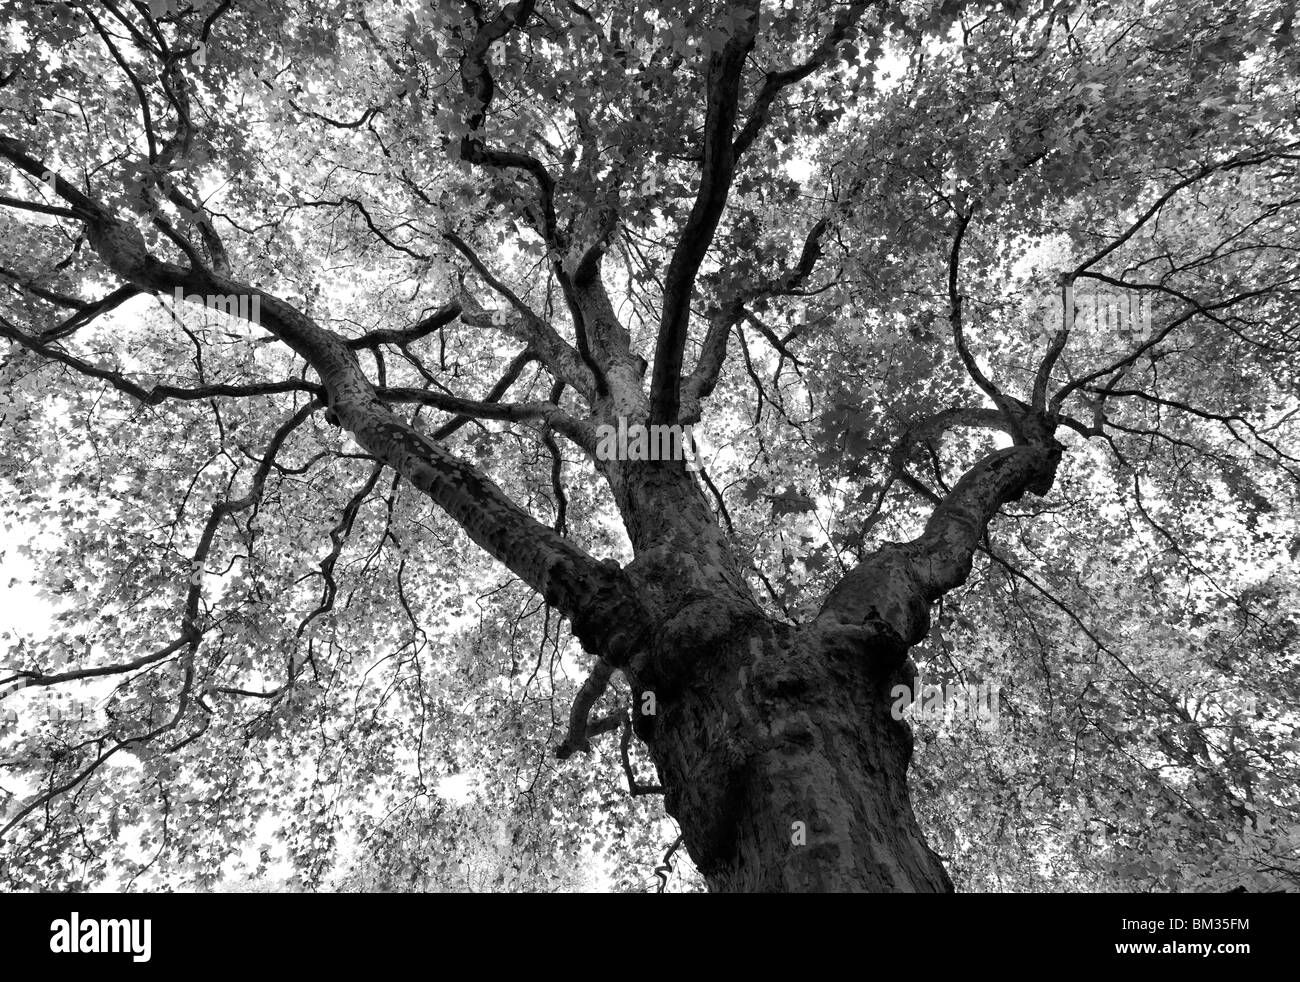 London Plane Tree, ( Shot On A Hasselblad H3DII-50, Producing A 140MB+ Tiff File If Required) Stock Photo